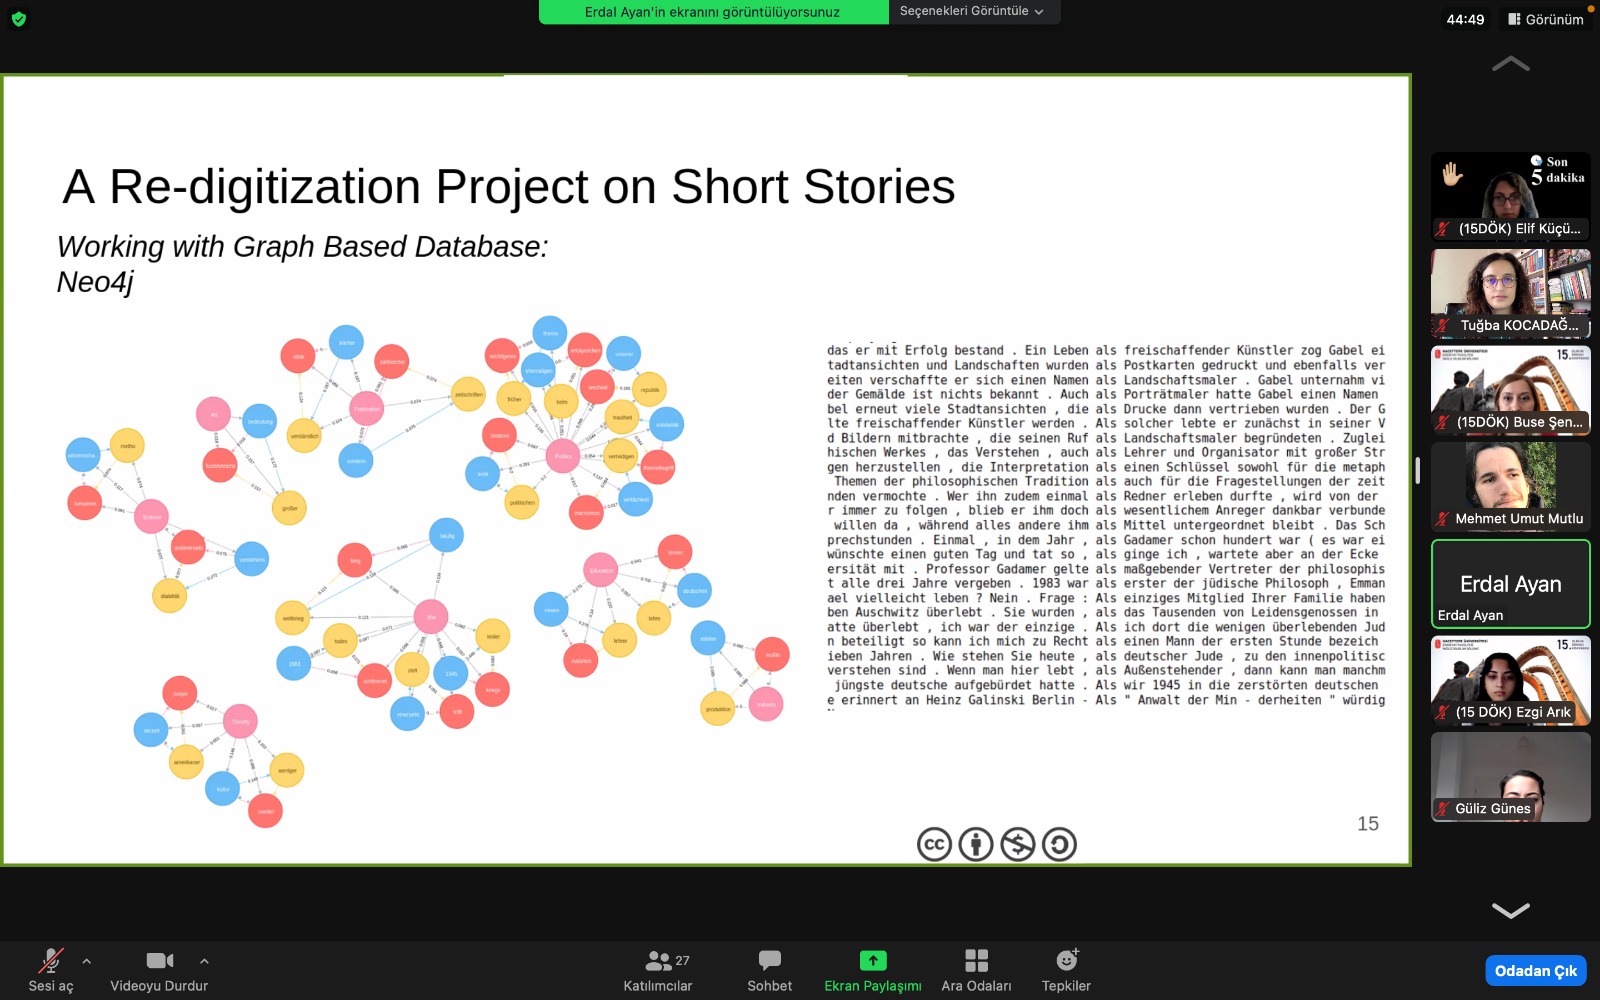 Building a Graph Based Corpus for Short Stories